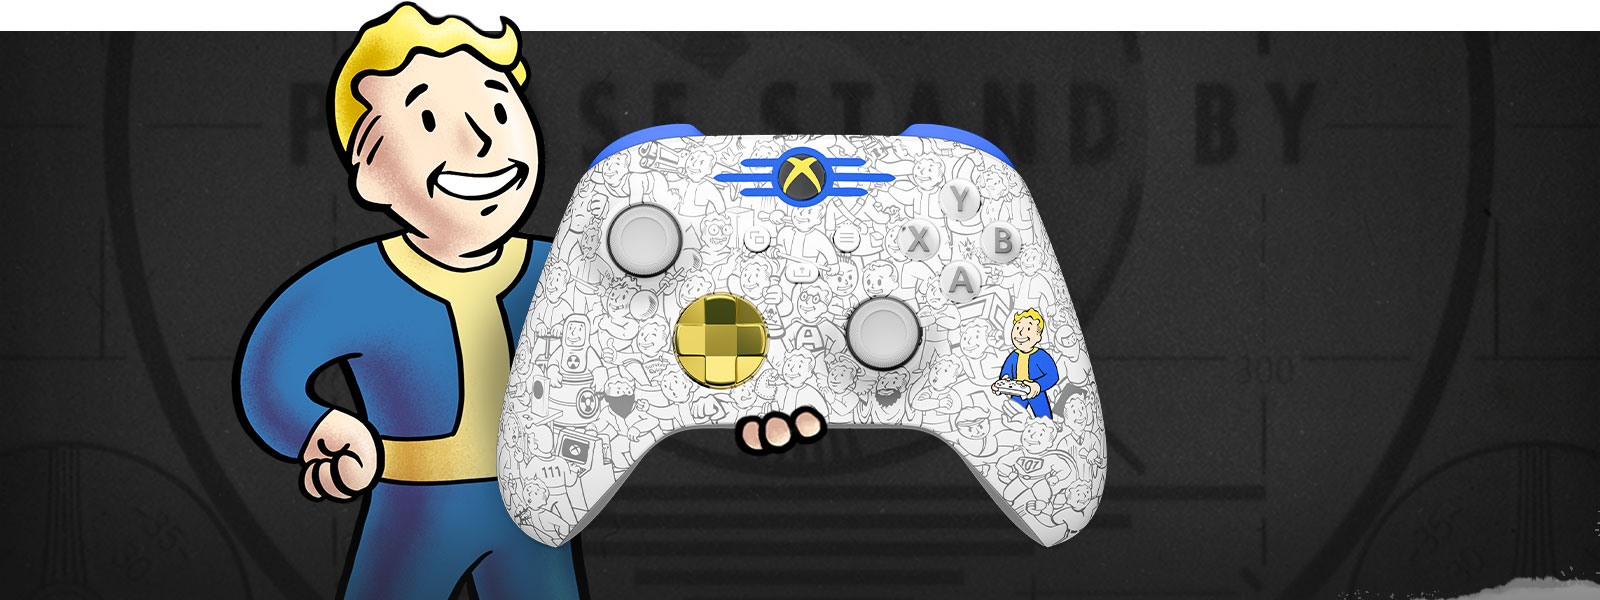 Vault Boy holds out an Xbox Wireless Controller – Fallout edition in his palm. A screen with the message 'PLEASE STAND BY' is behind him.